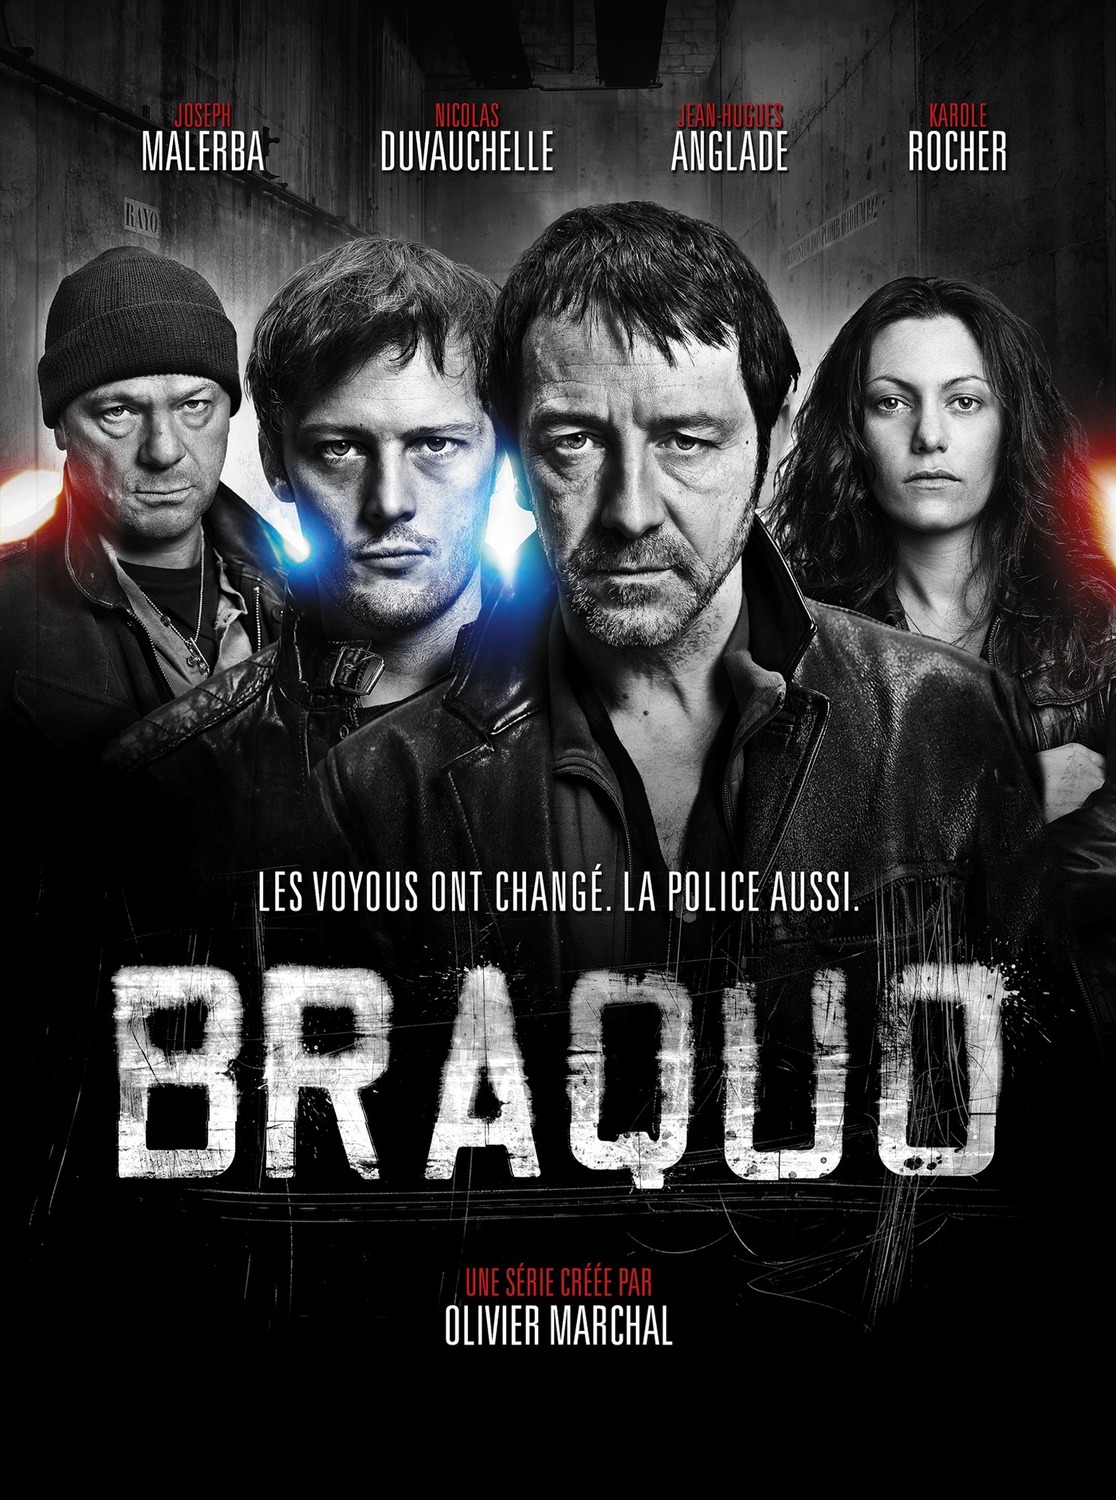 Extra Large TV Poster Image for Braquo 